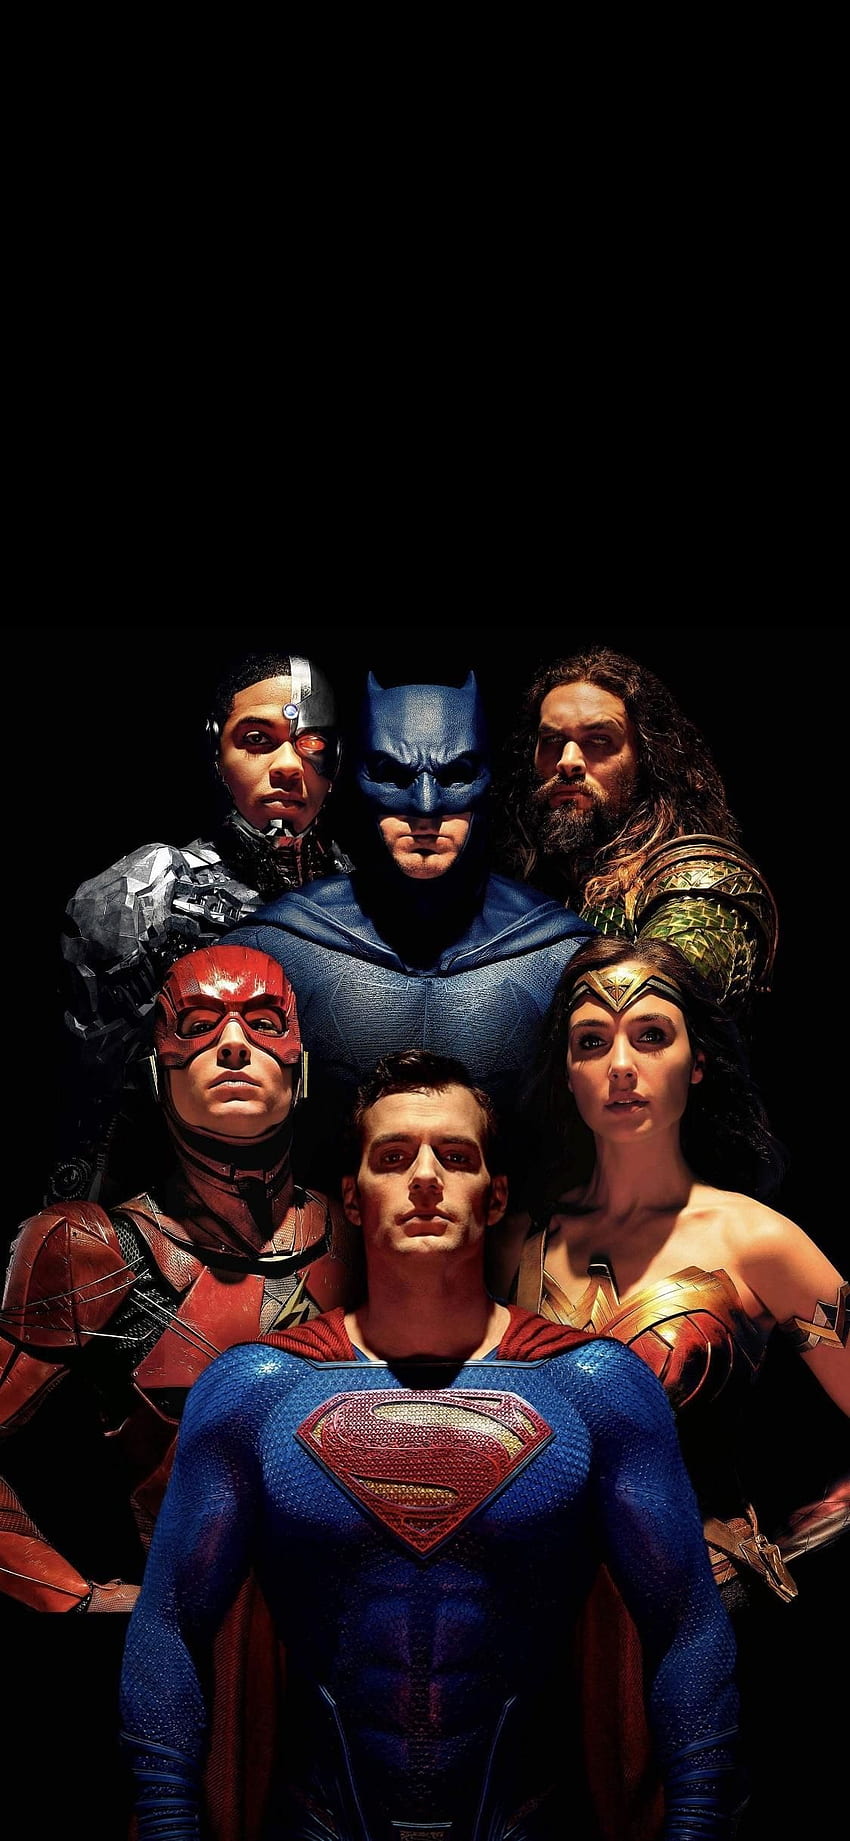 Justice League Textless Superman Poster. Justice league, Top ten HD phone wallpaper